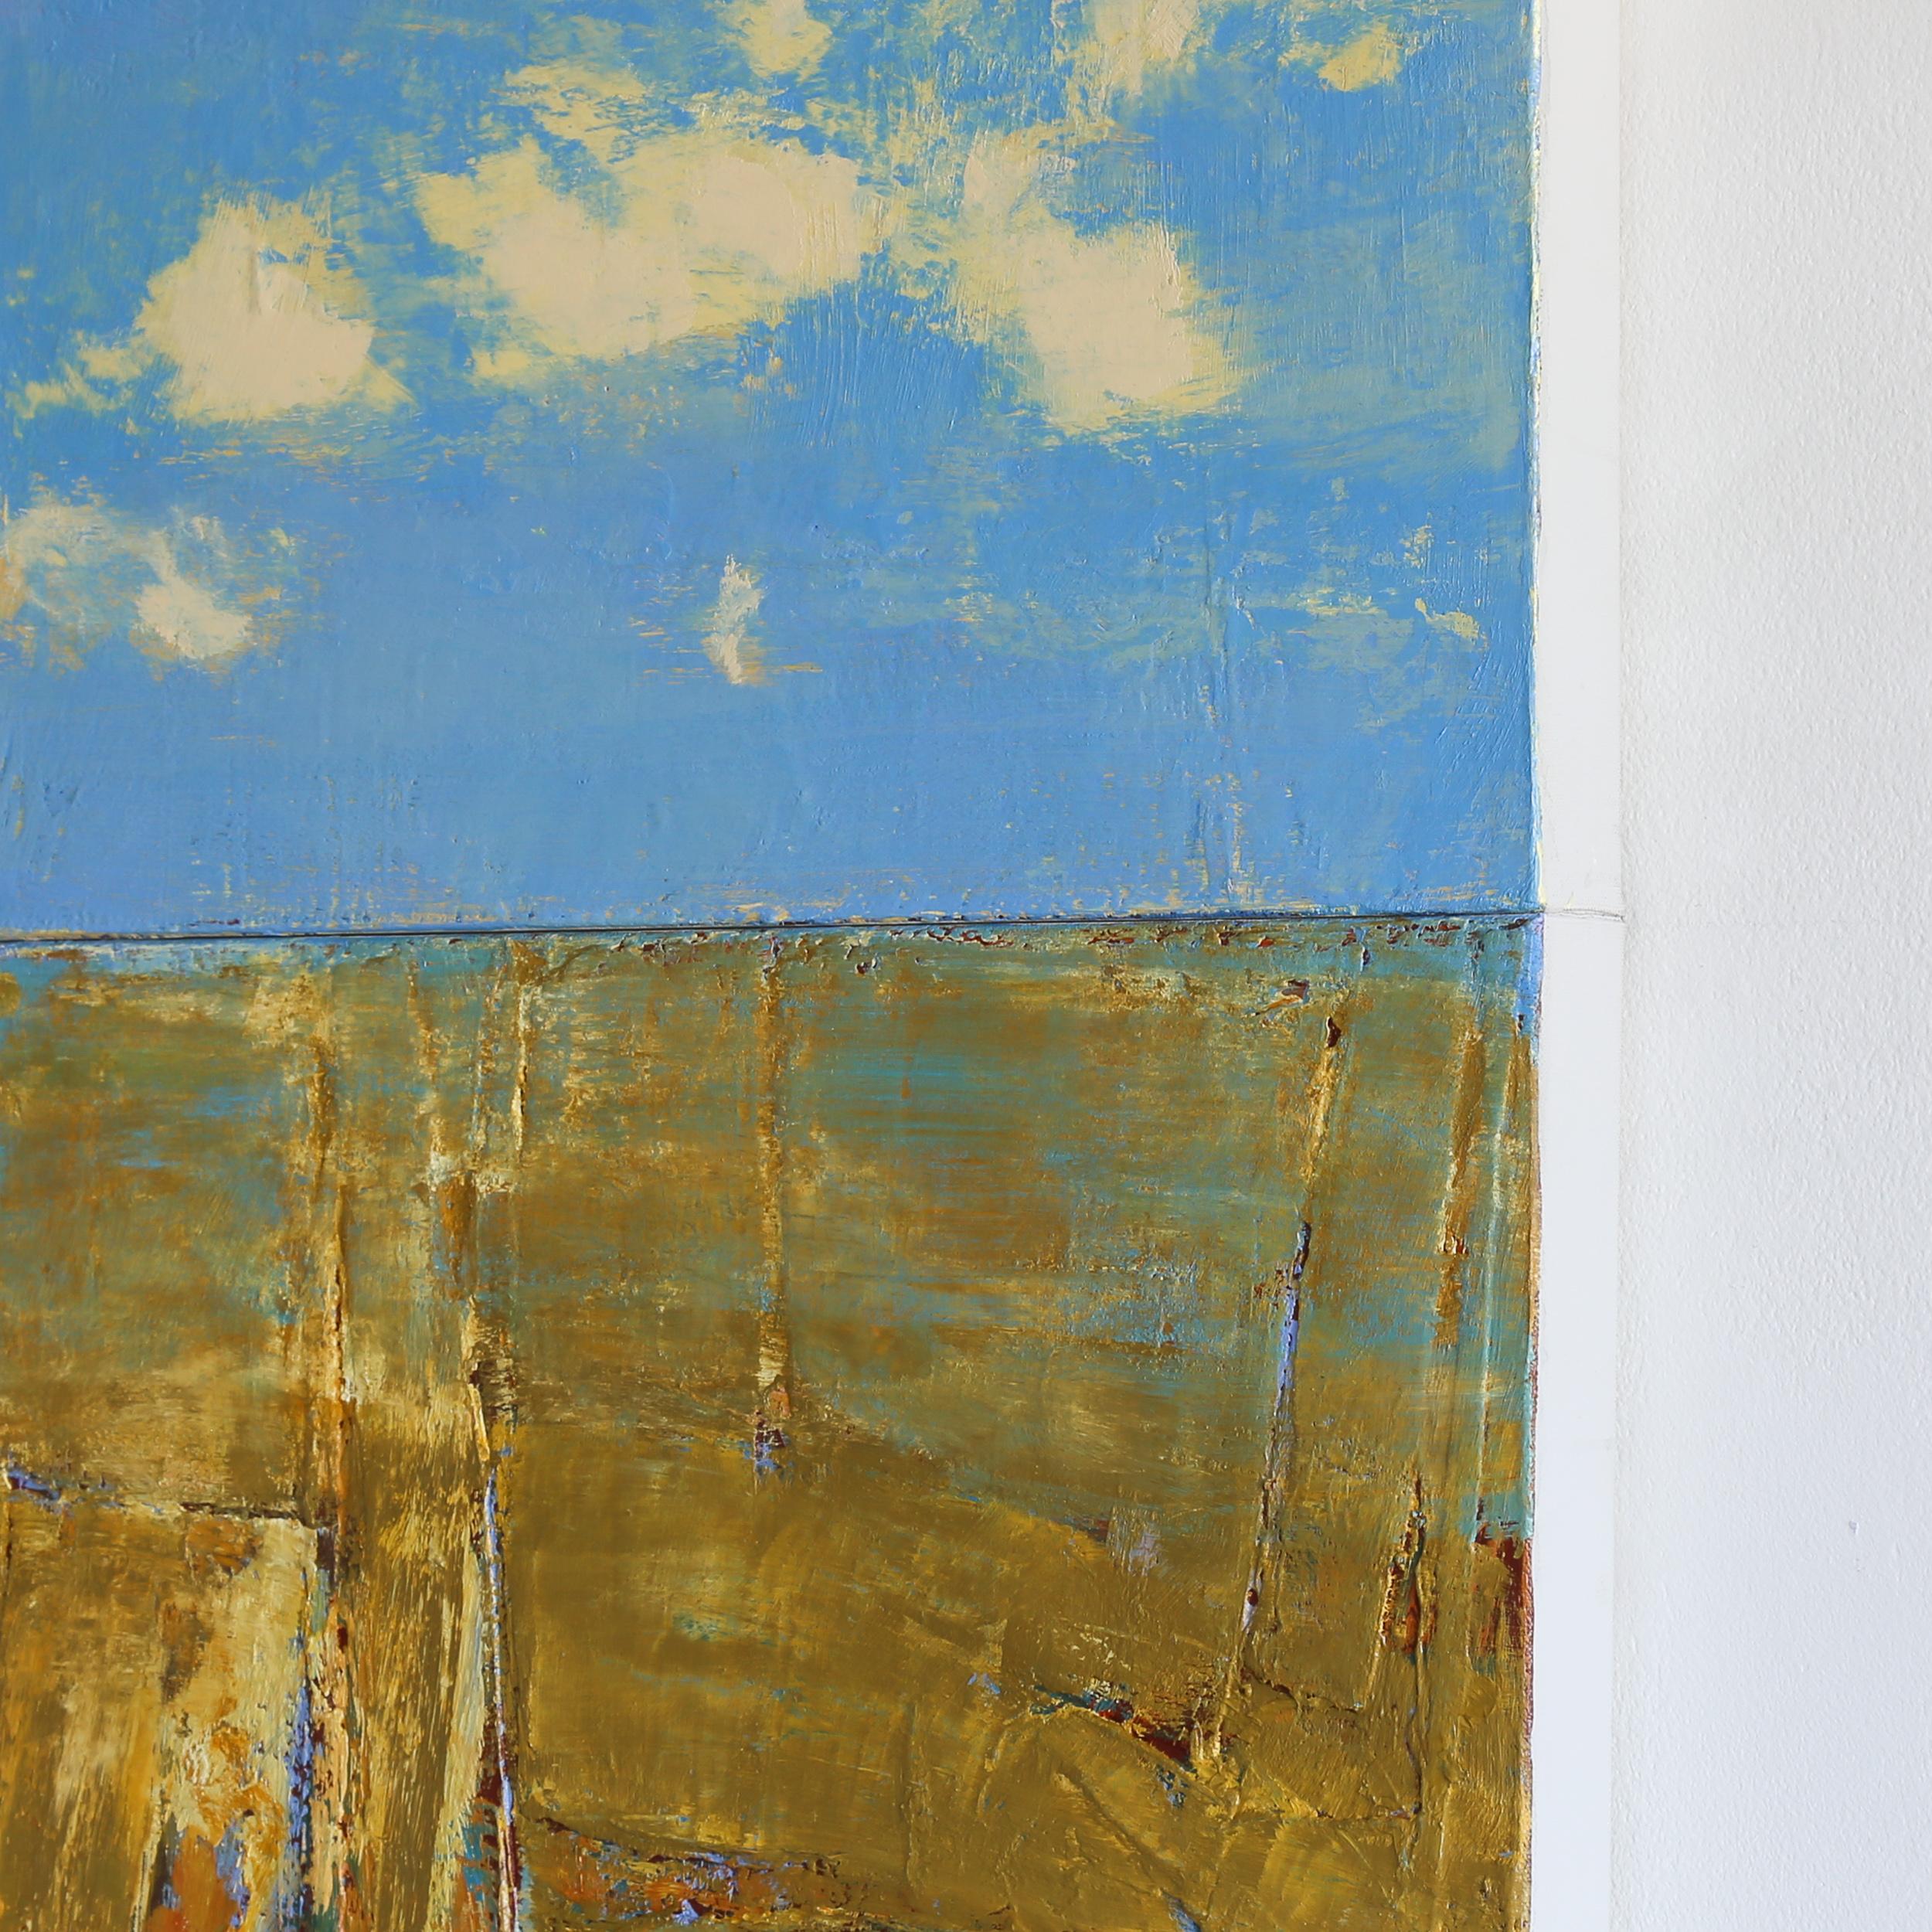 Patrick Adams, CLEARING, Oil on two canvases, 40.00 X 20.00 in, $6,000.00, Blue, Yellow, Abstract, painting, landscape

Art has a very elusive nature. On the one hand, it exists as a very concrete, physical thing made of paint, canvas, wood, or